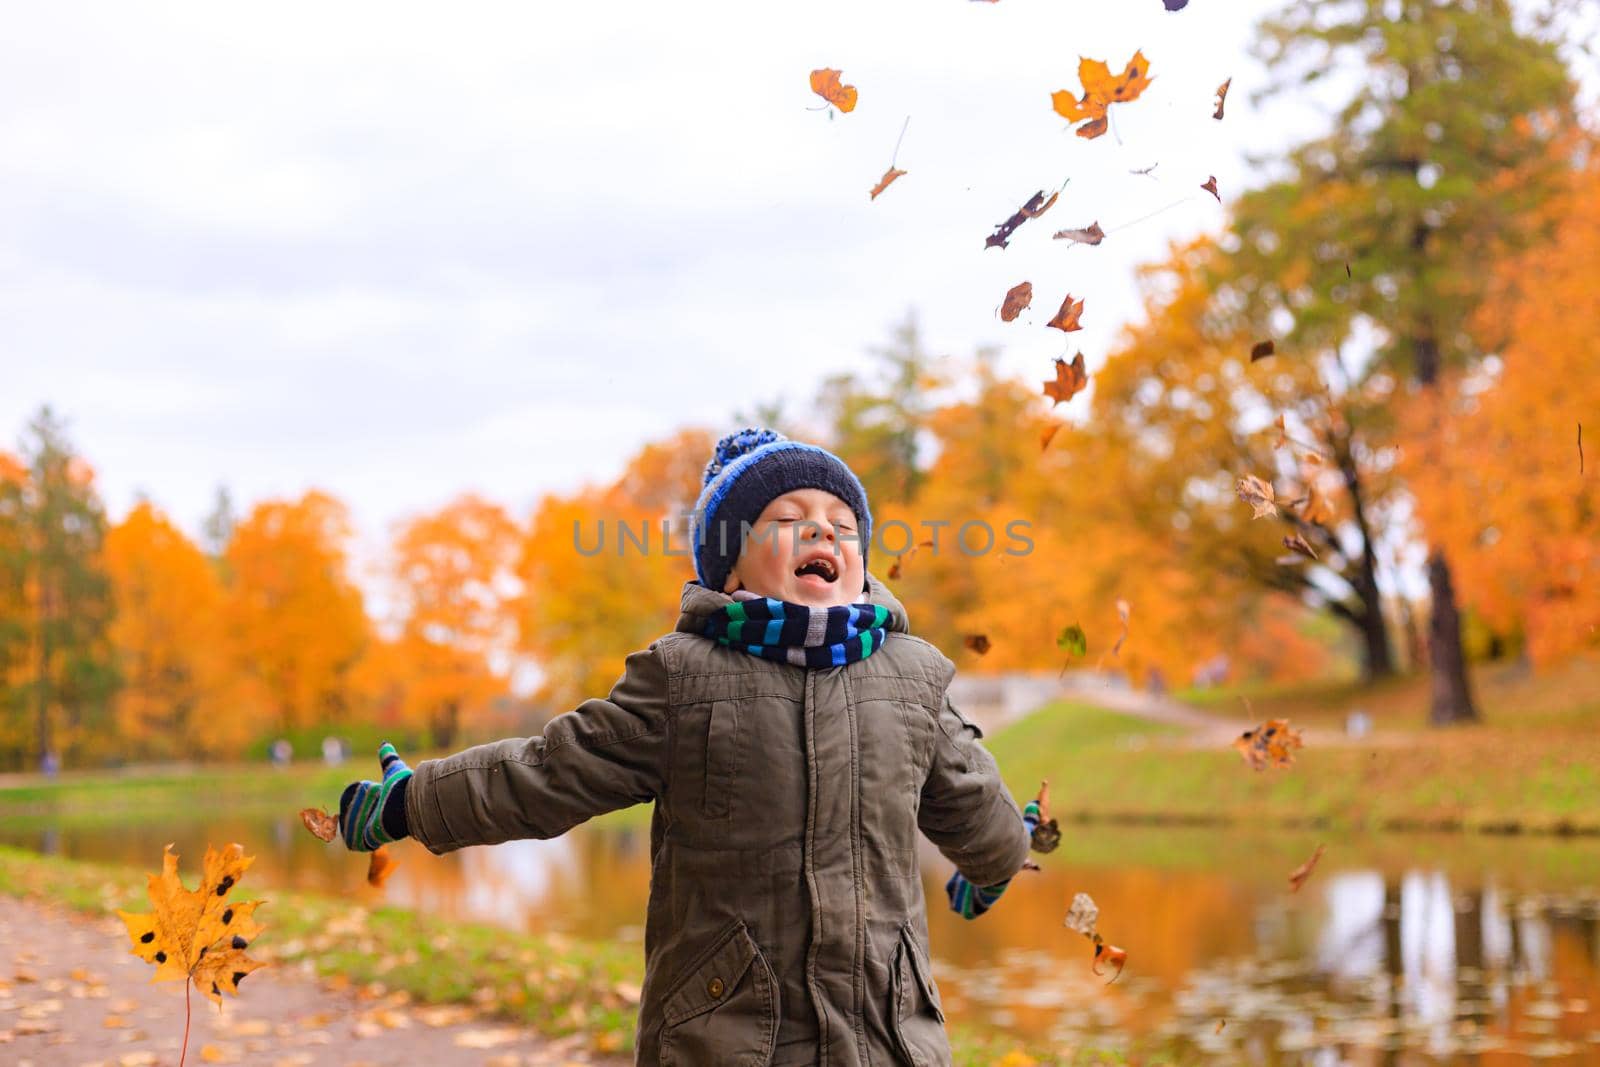 The boy throws autumn leaves . Autumn article. A happy child. Autumn. Fallen leaves